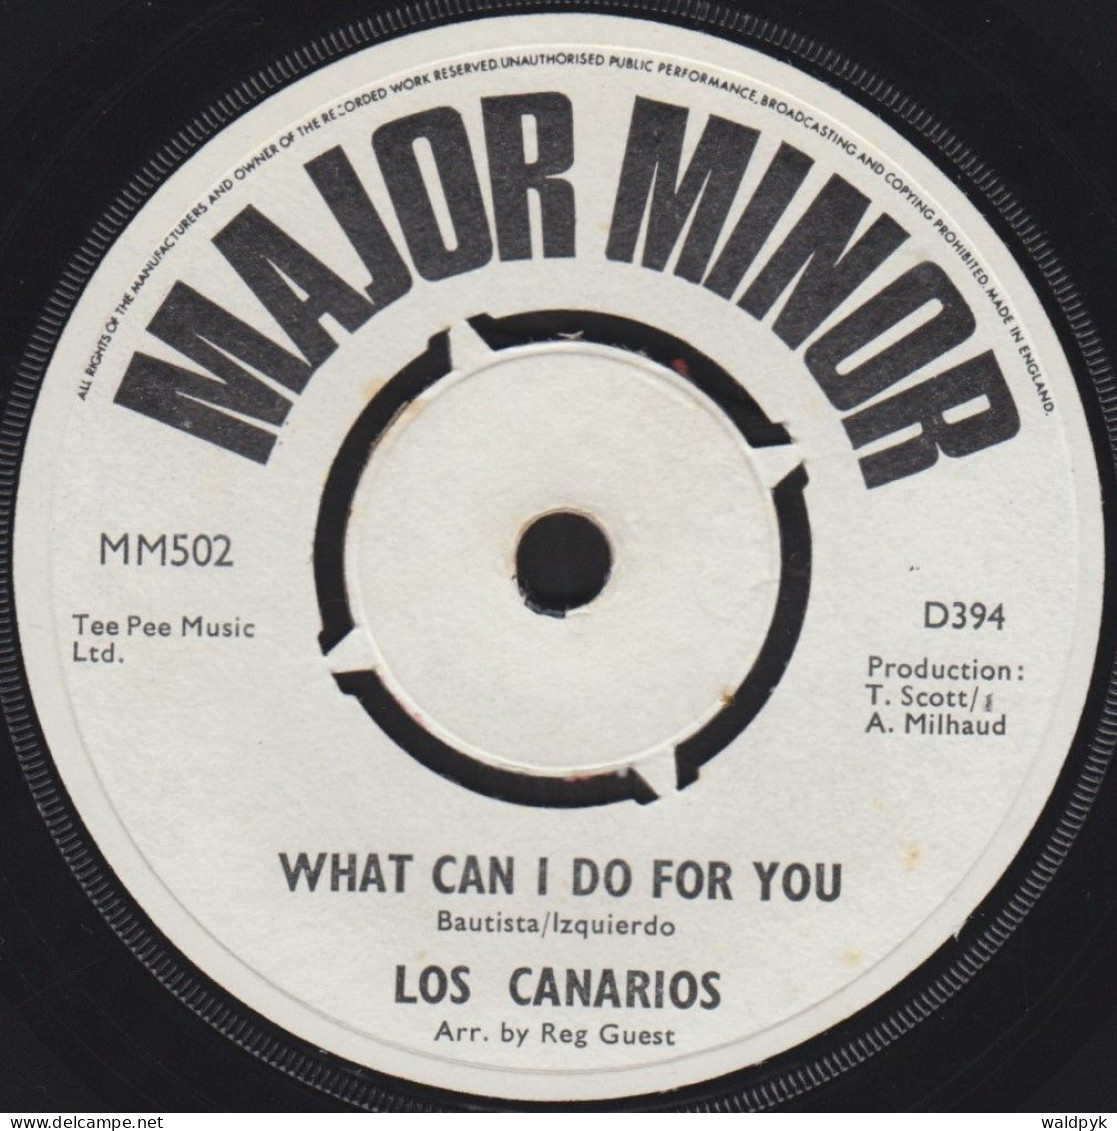 LOS CANARIOS - Three-Two-One-Ah - Other - English Music